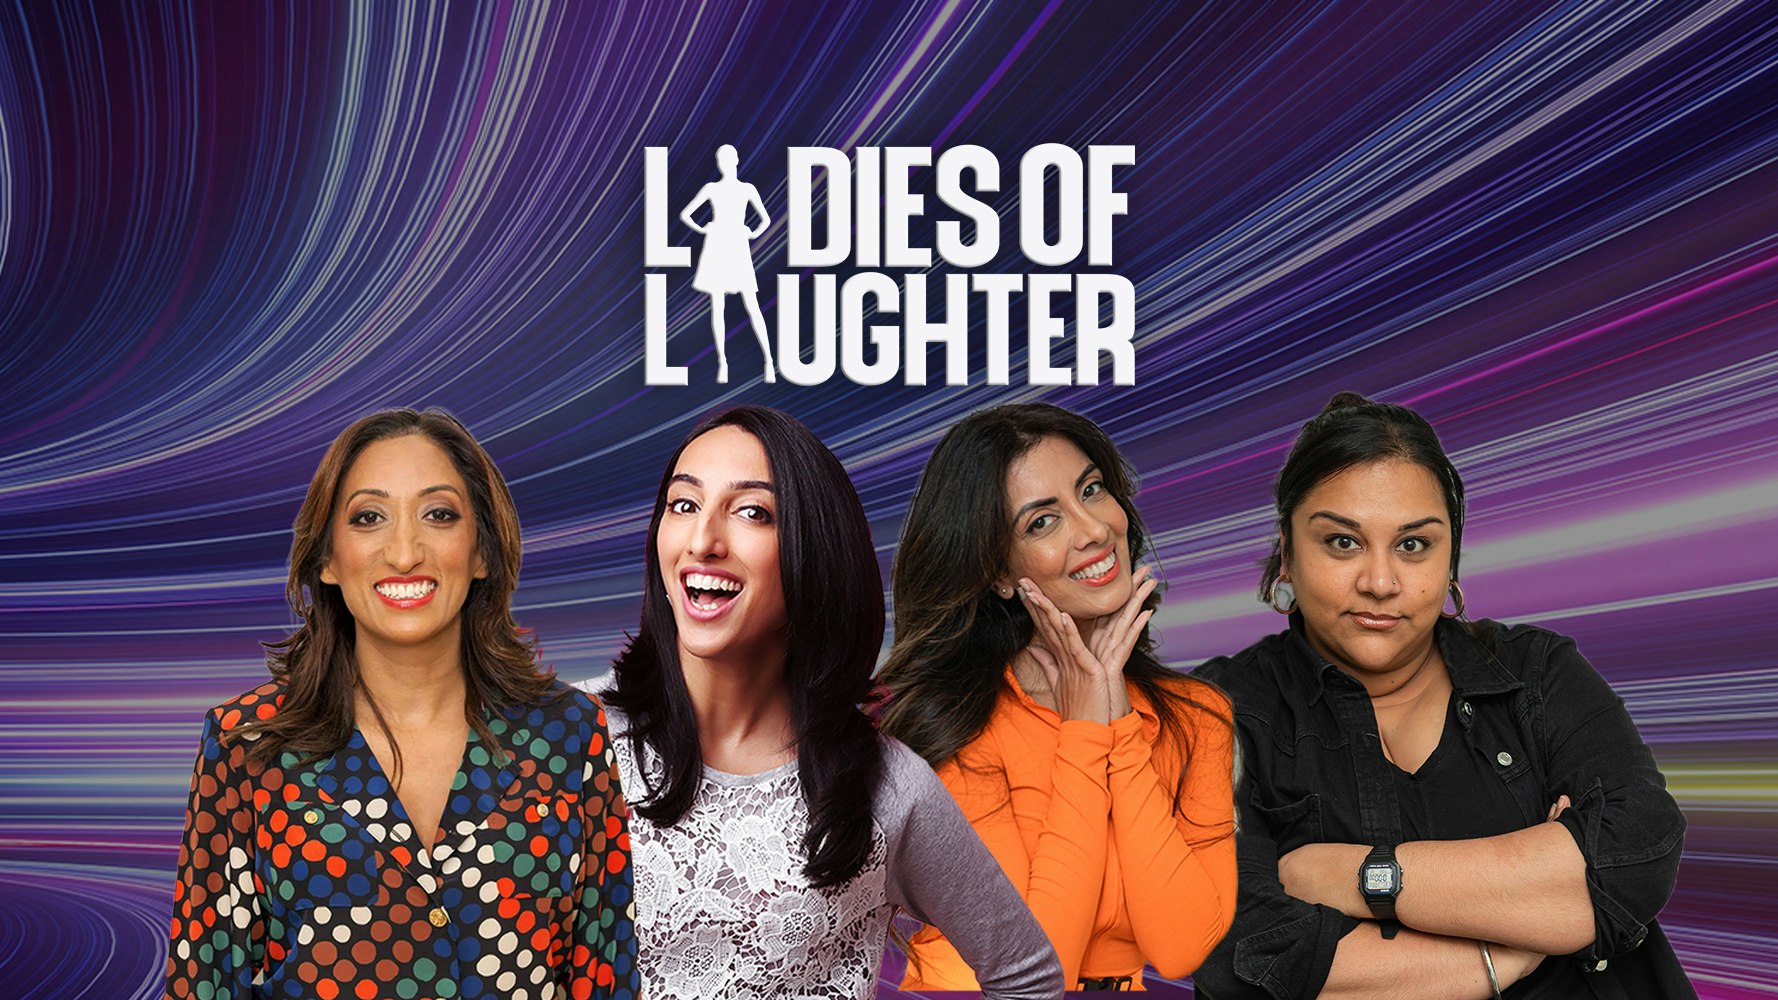 LOL : Ladies Of Laughter – Leicester